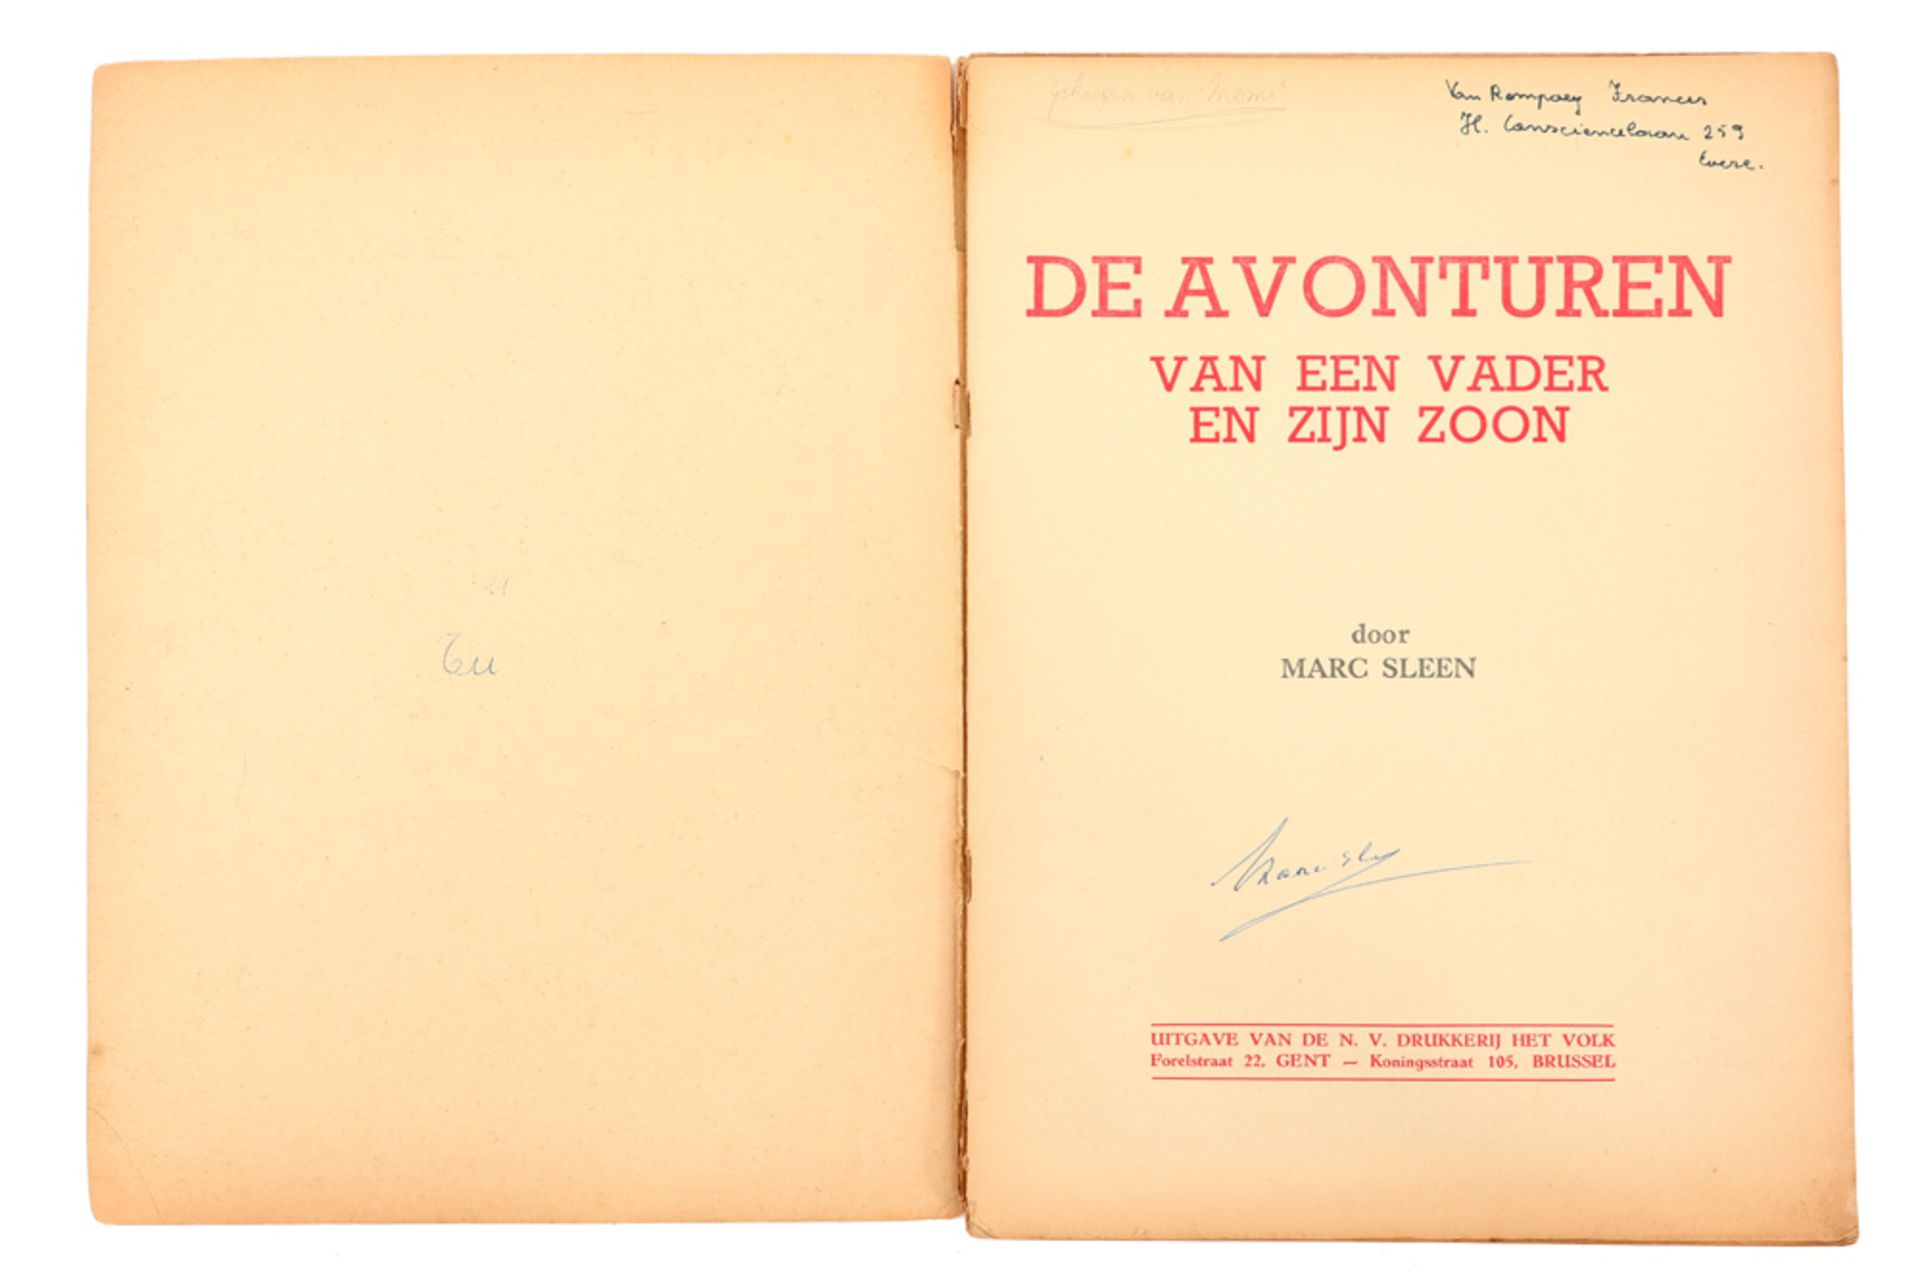 two Belgian comic strips dd 1962, one signed by the author Marc Sleen || WILLY VANDERSTEEN - MARC - Image 2 of 8